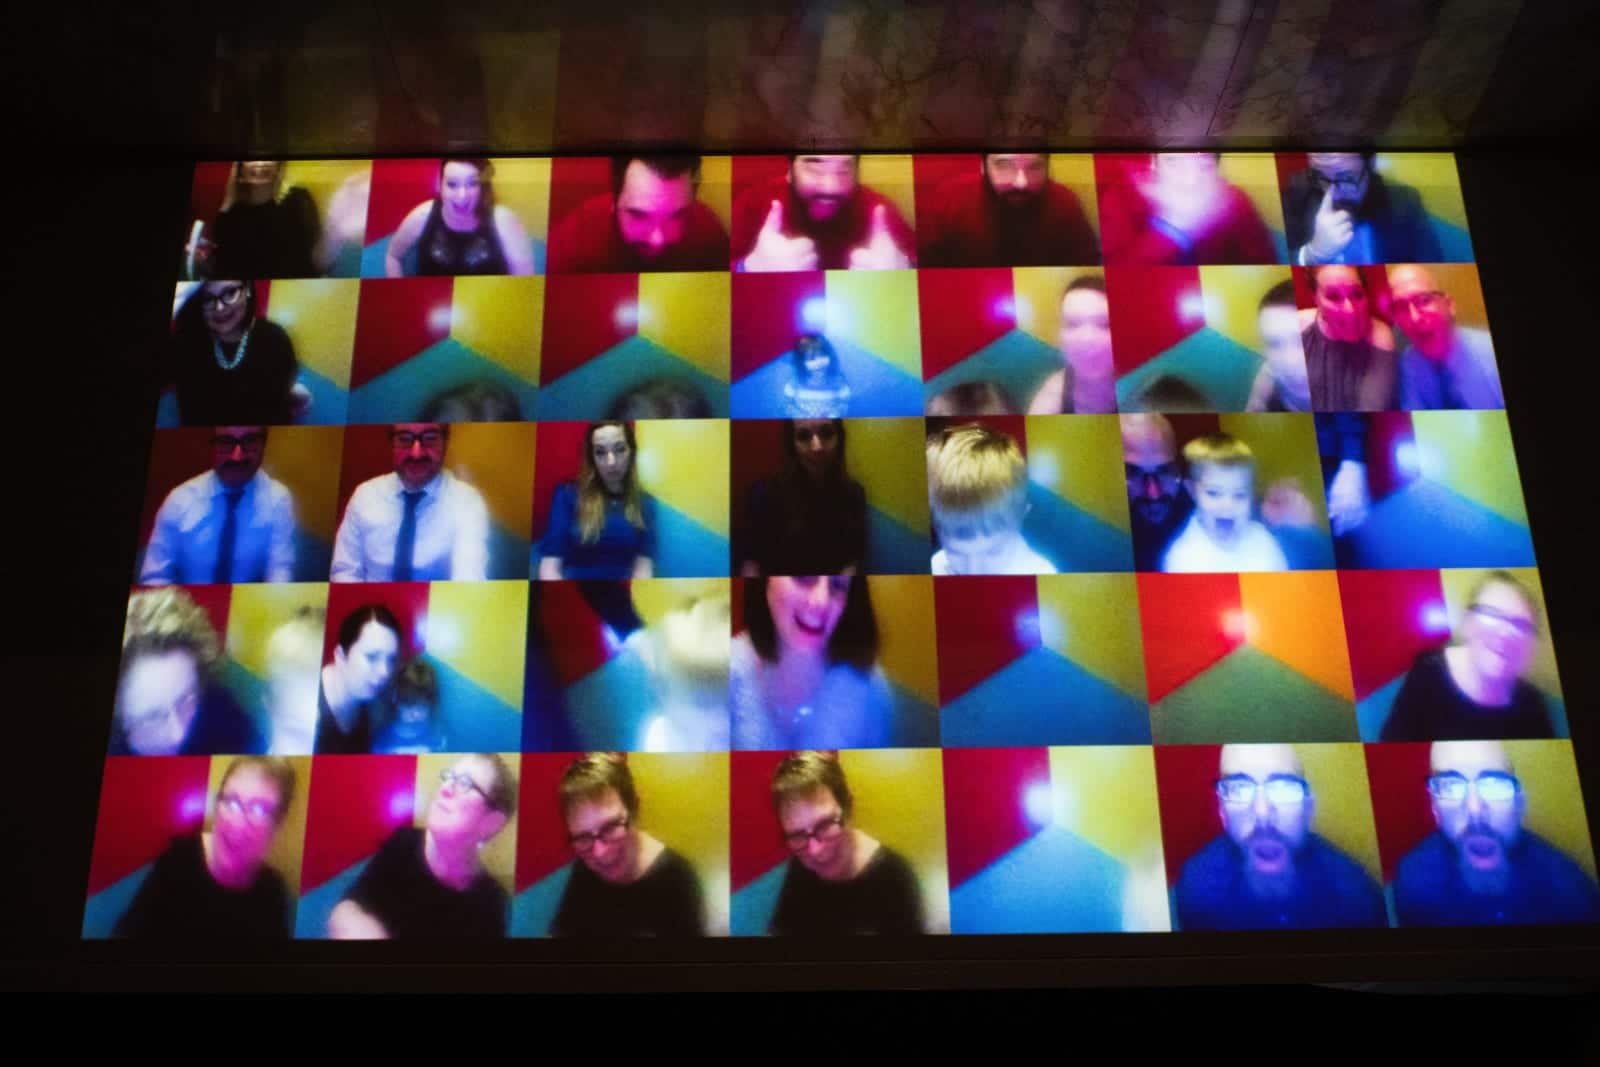 A montage of guests who recorded themselves on the video booth at the Pittsburgh Children's Museum.